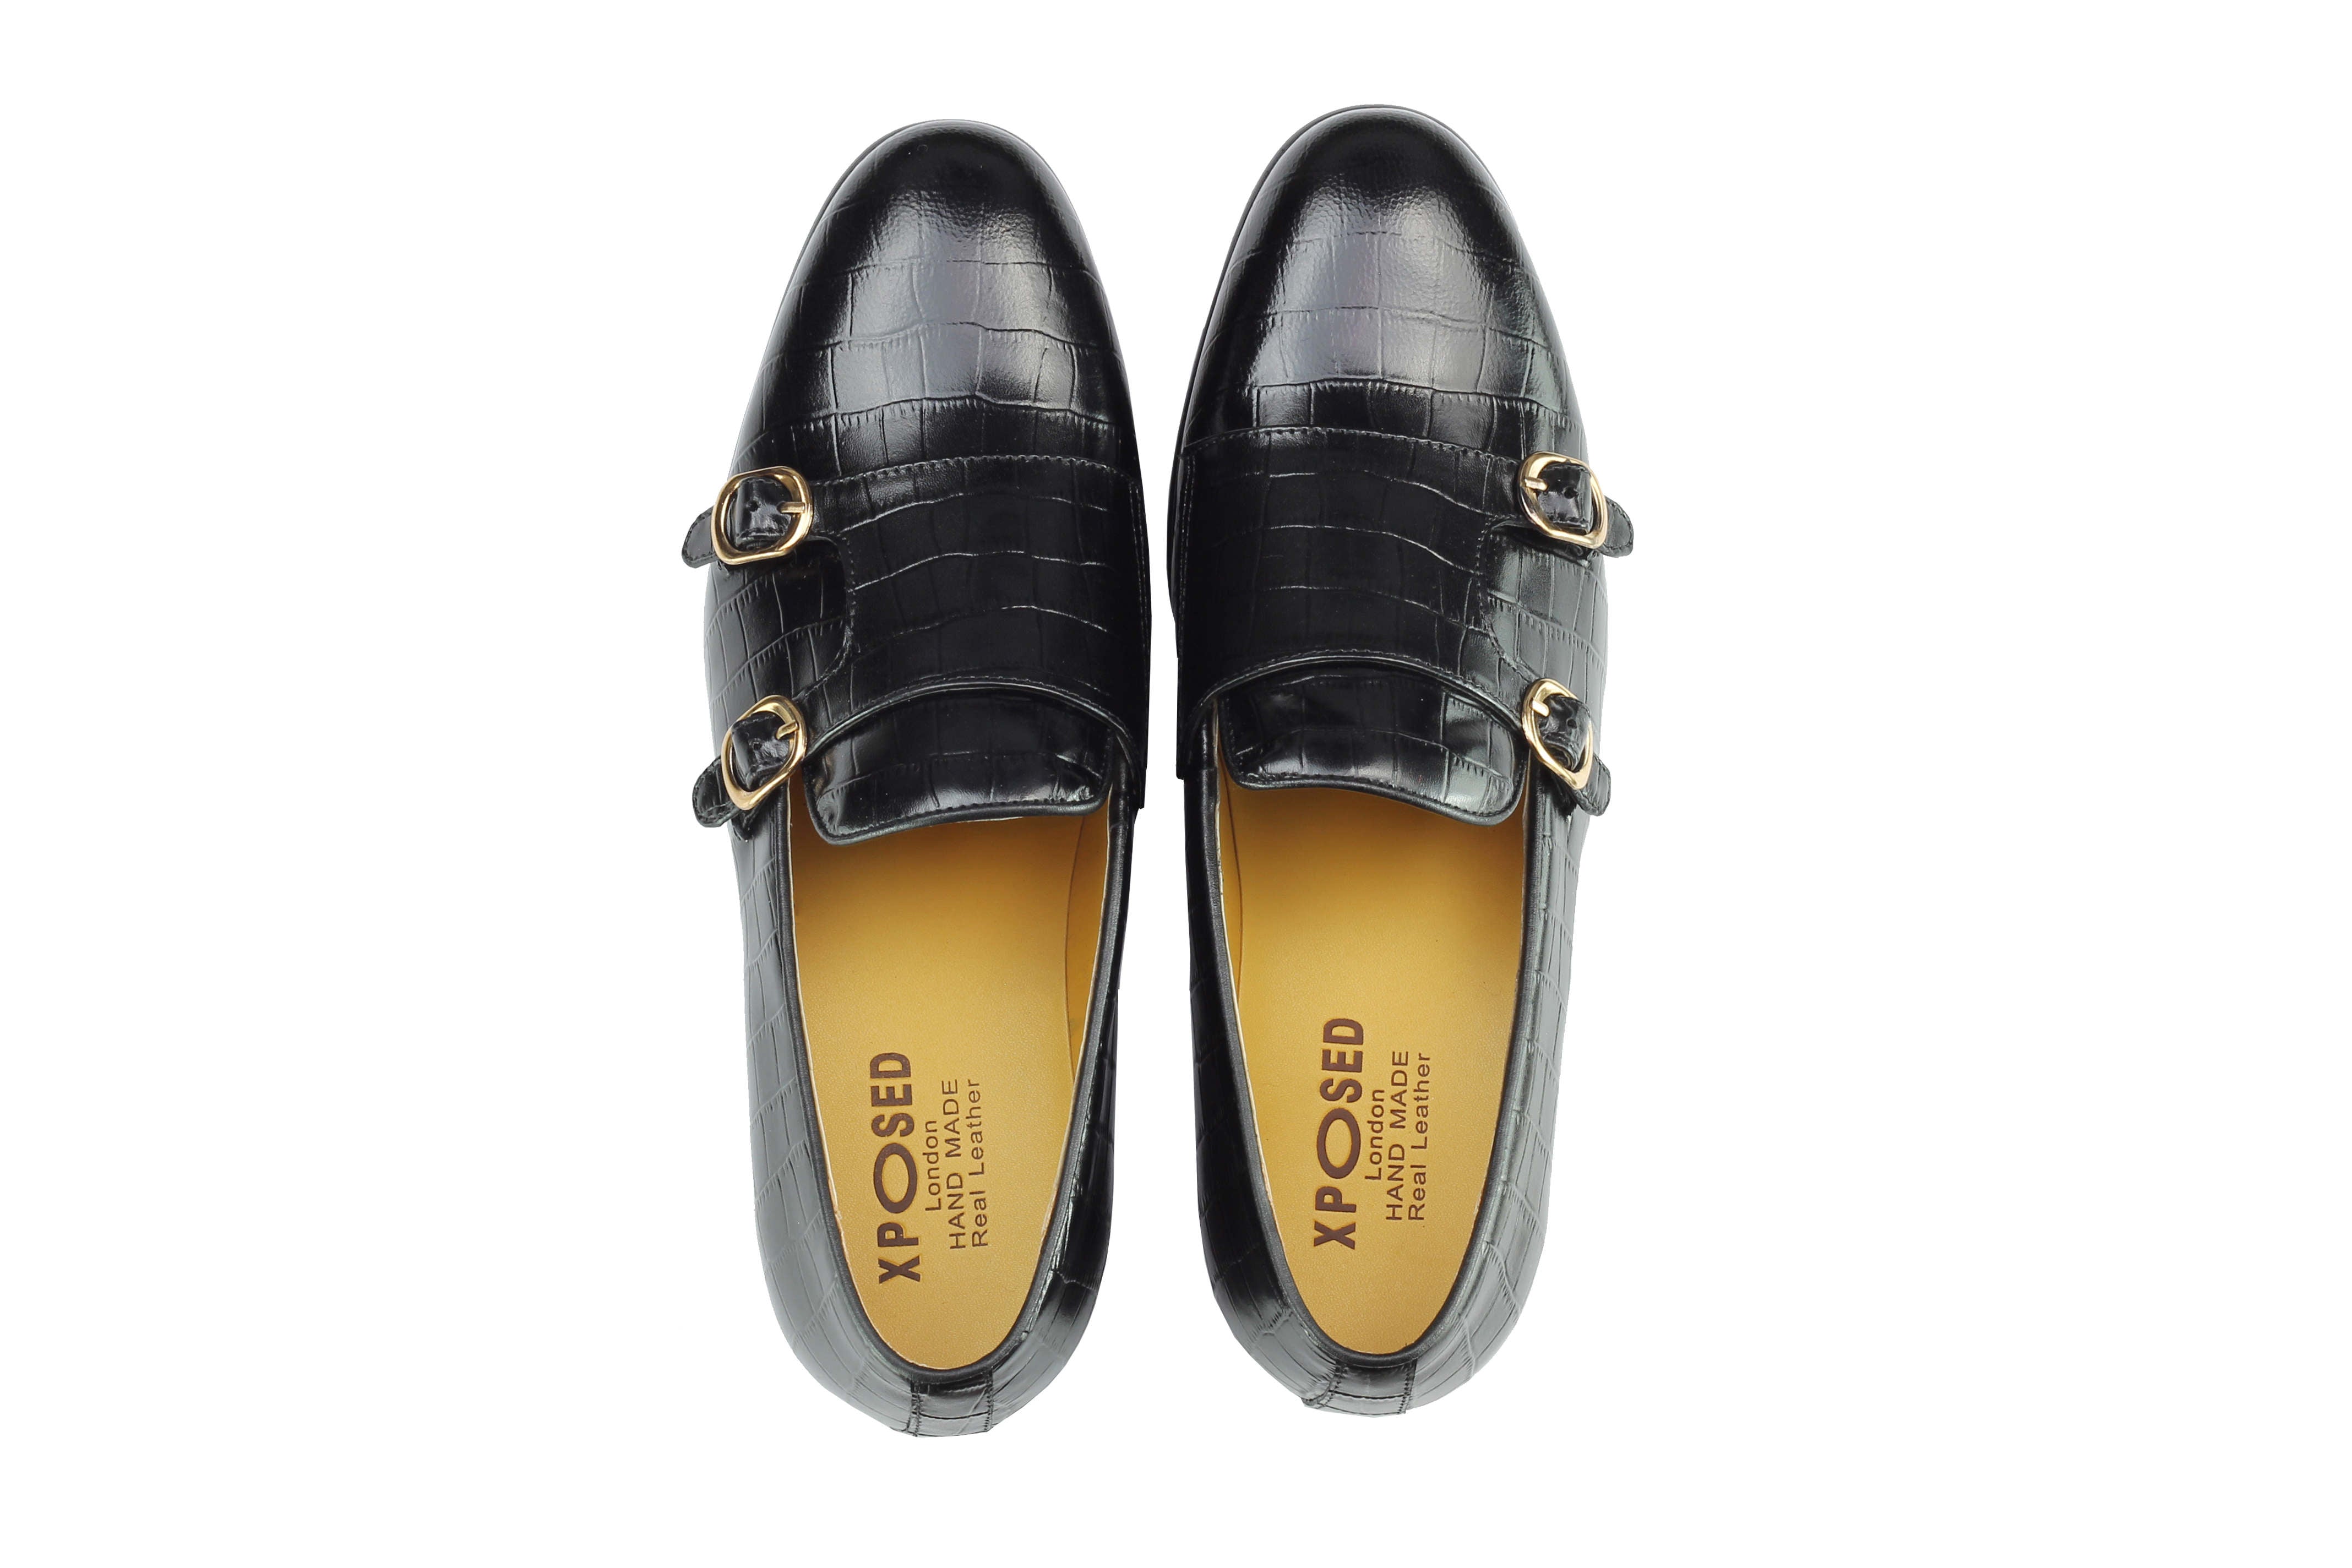 Real Leather Double Strap Monk Loafer